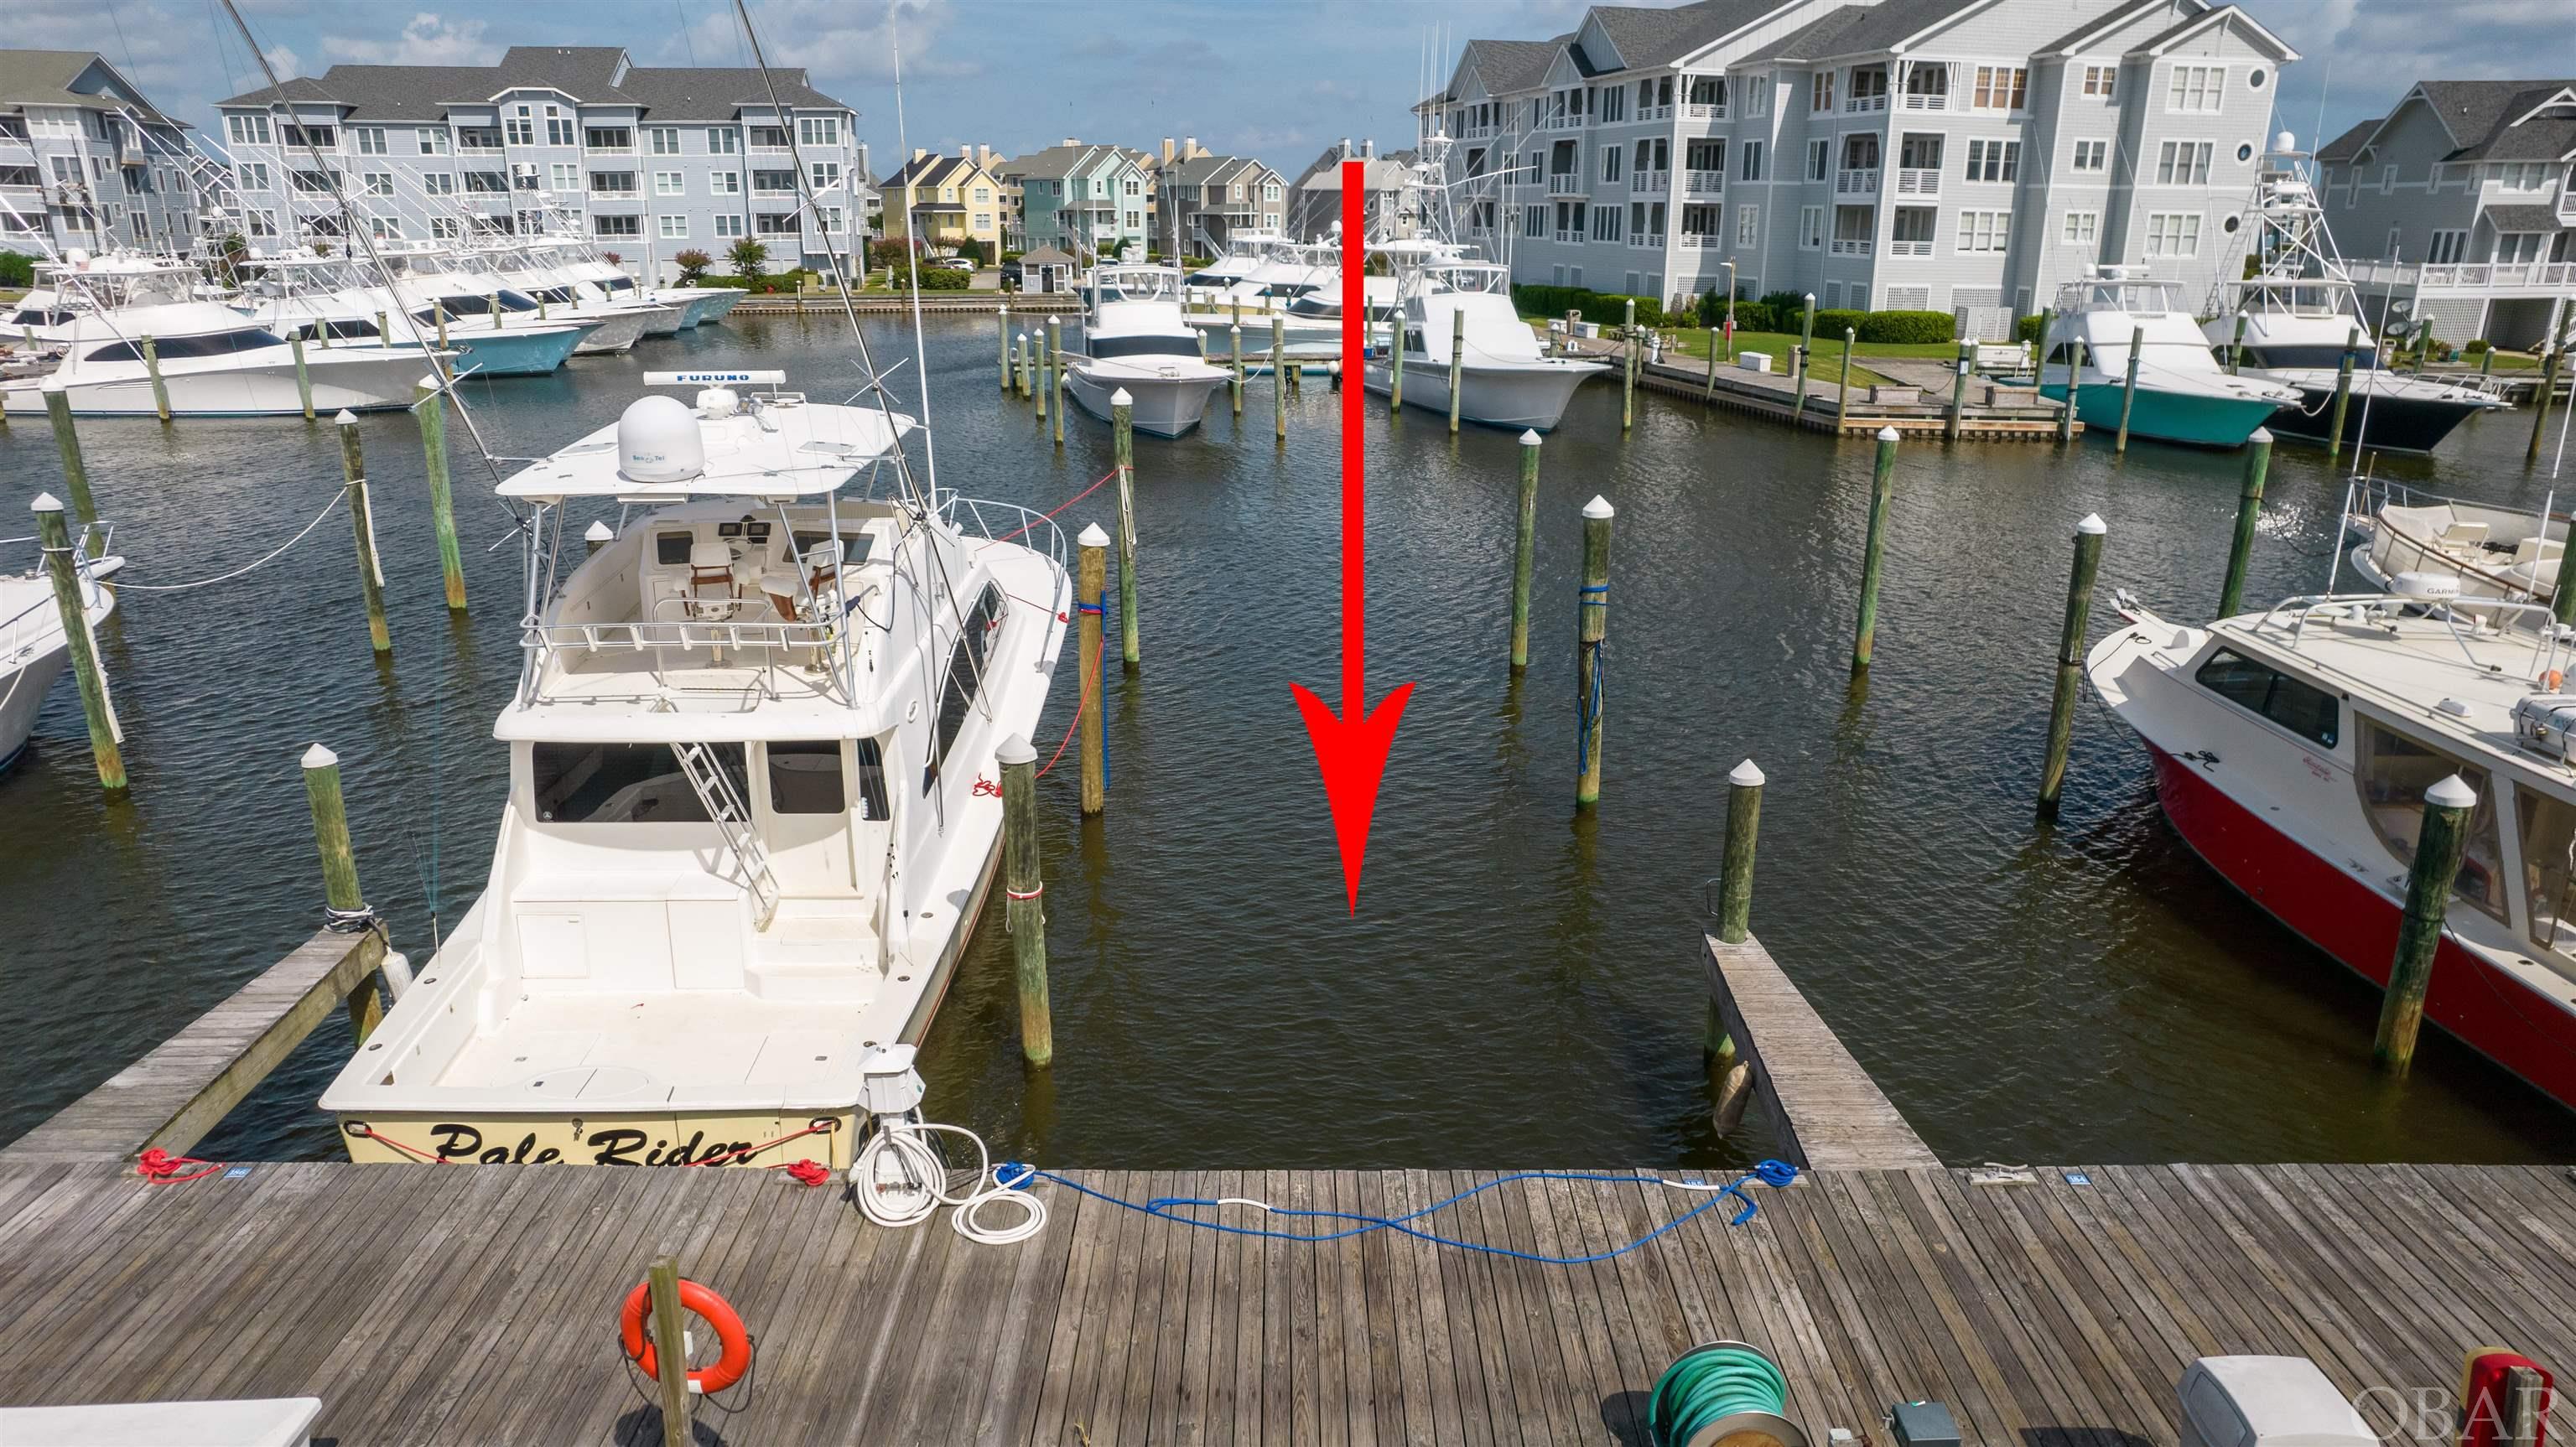 Located on G Dock, this 60FT x 20W boat slip has location value with easy sound access and parking.  Pirate's Cove Marina is a protected, deep water, full service marina with 195 slips and a charter fleet of sport fish boats for offshore, nearshore and inlet fishing.  Pirate's Cove Marina is one of the largest world class marinas on the East Coast with a high level of experienced charter sport fishing captains and crew. Pirate's Cove Marina offers: a fuel dock for non-ethanol gas and diesel, slips with in-slip fueling, private fish cleaning houses, showers, Ship's Store for light provisioning, an on-site full-service restaurant and Tiki Bar, and annual fishing tournaments.  Pirate's Cove Marina is approximately eight miles inside and north of Oregon Inlet via a deepwater, well-marked channel. The fixed bridge clearance of the Manteo/Nags Head causeway is 65 feet at mean high tide.